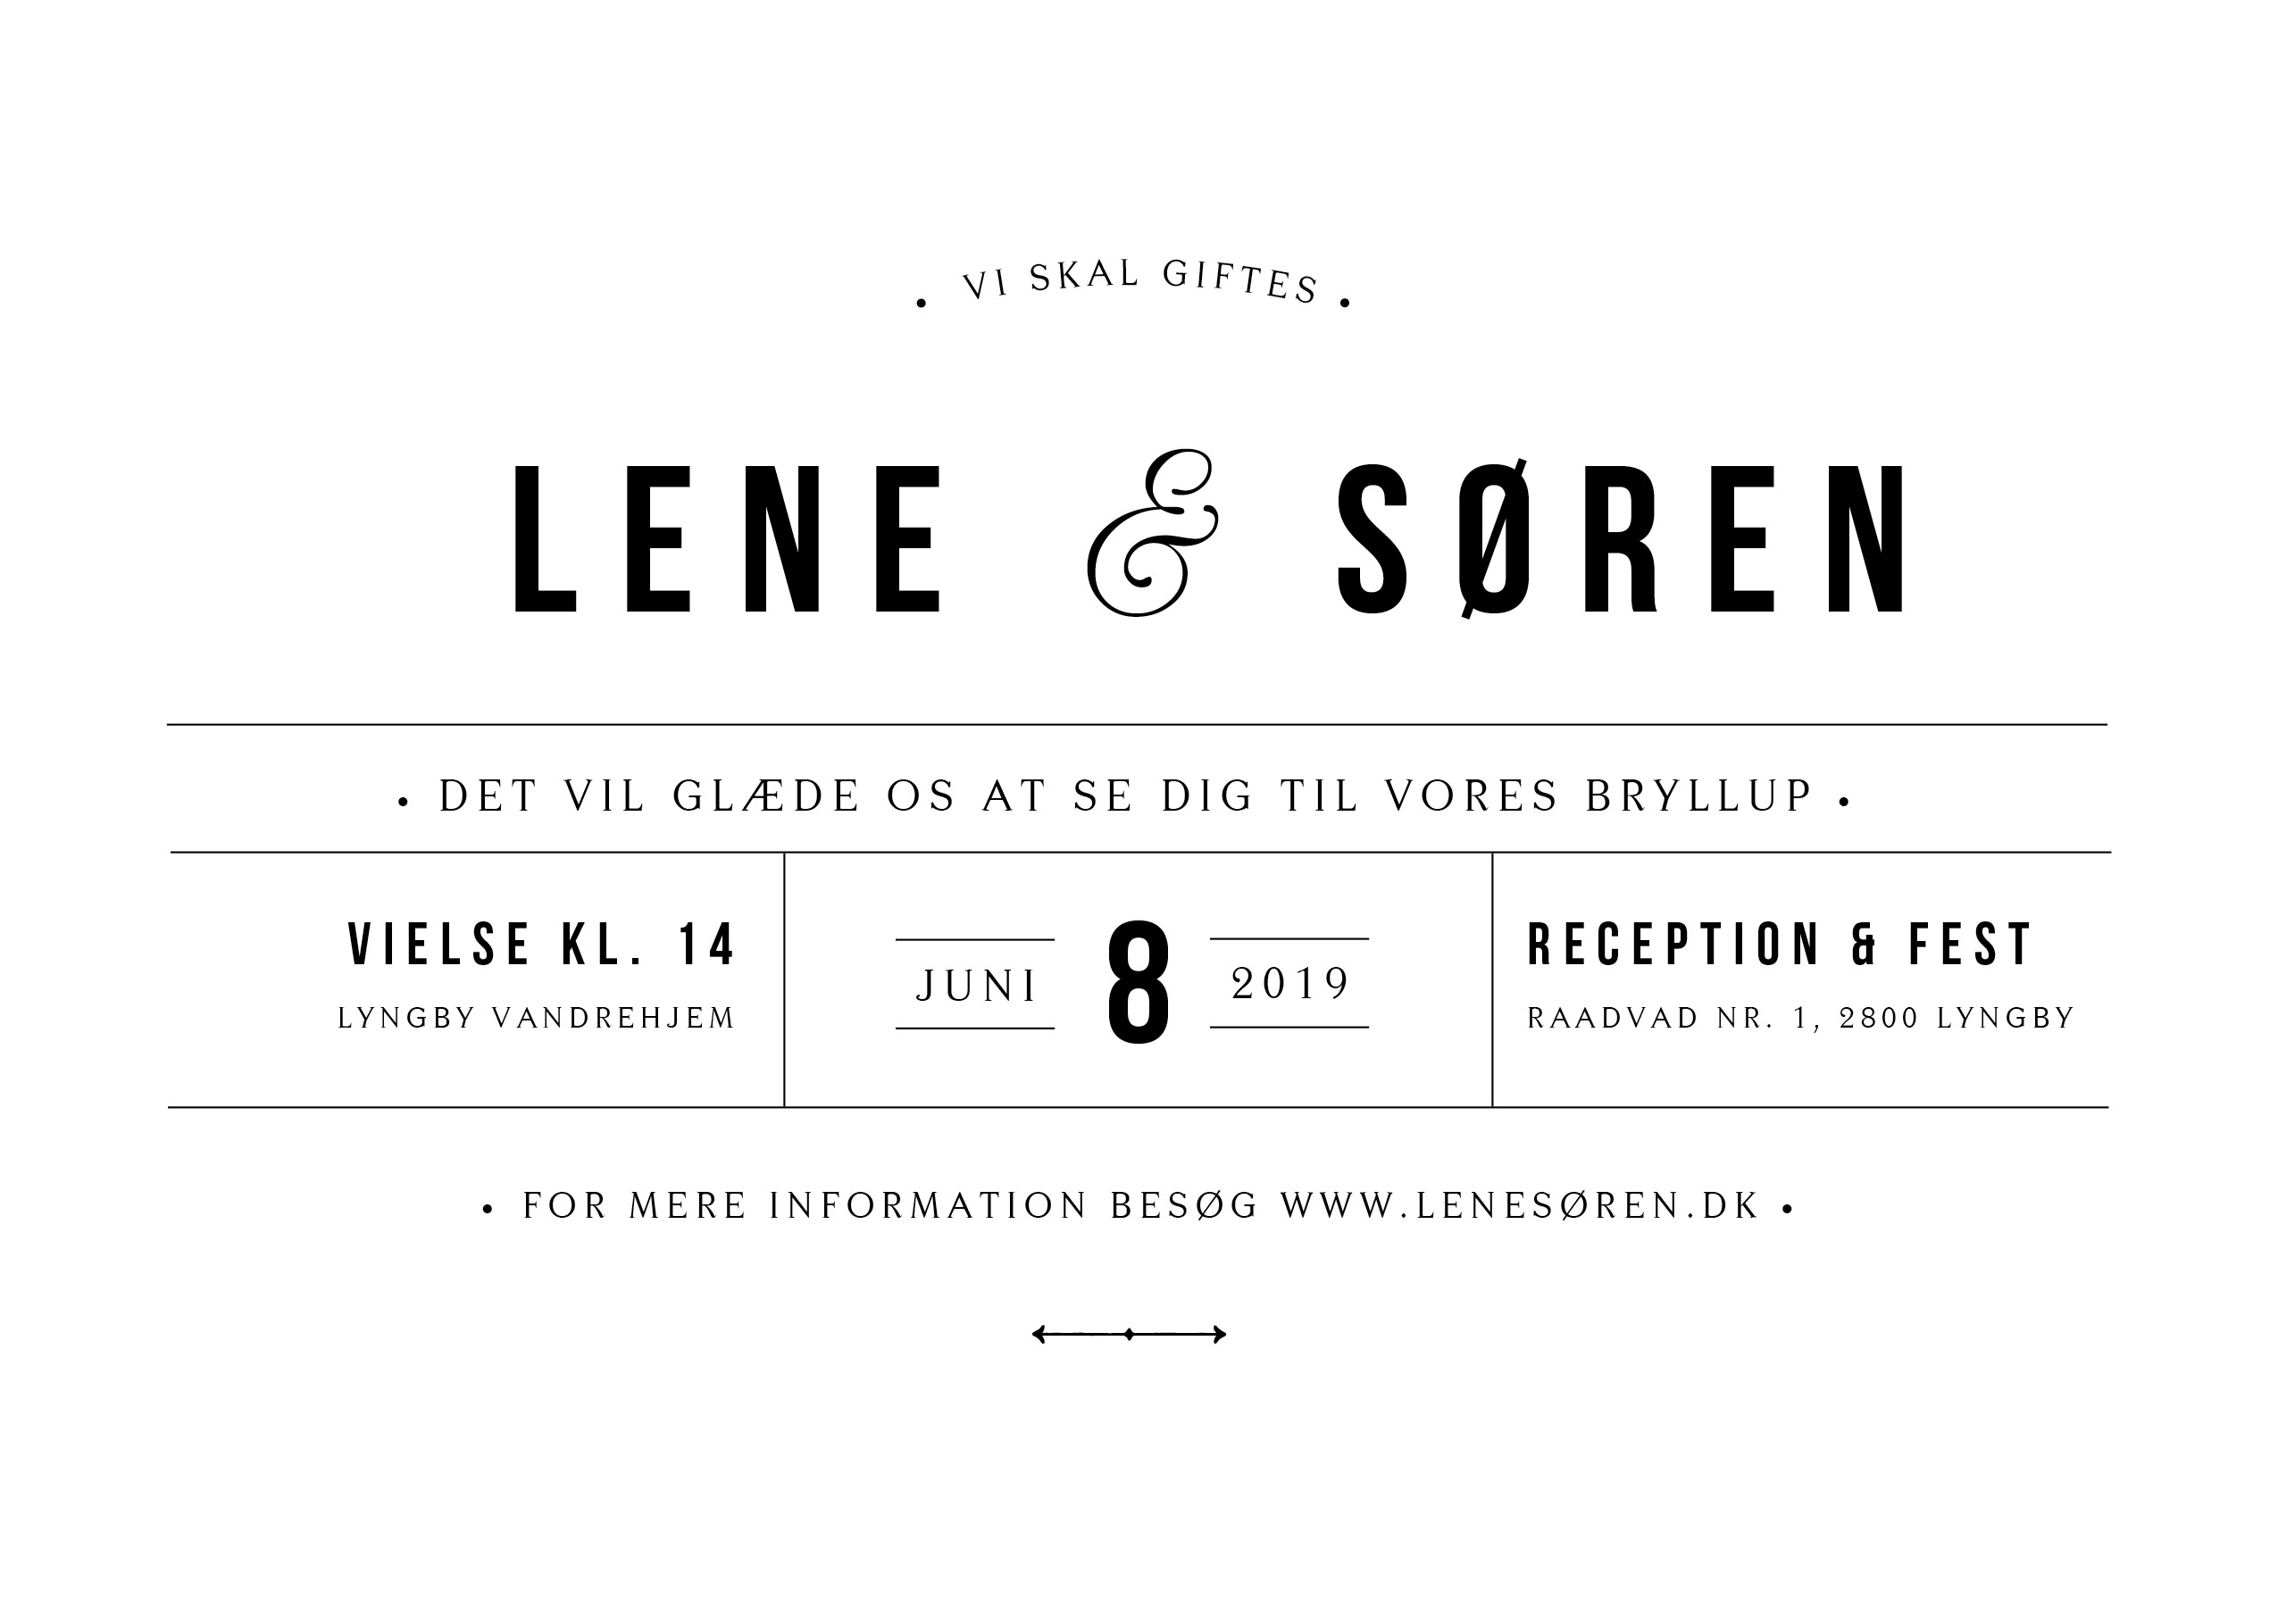 /site/resources/images/card-photos/card-thumbnails/Lene & Søren/8d7a658f8593ef08e7c0d2046750218f_front_thumb.jpg